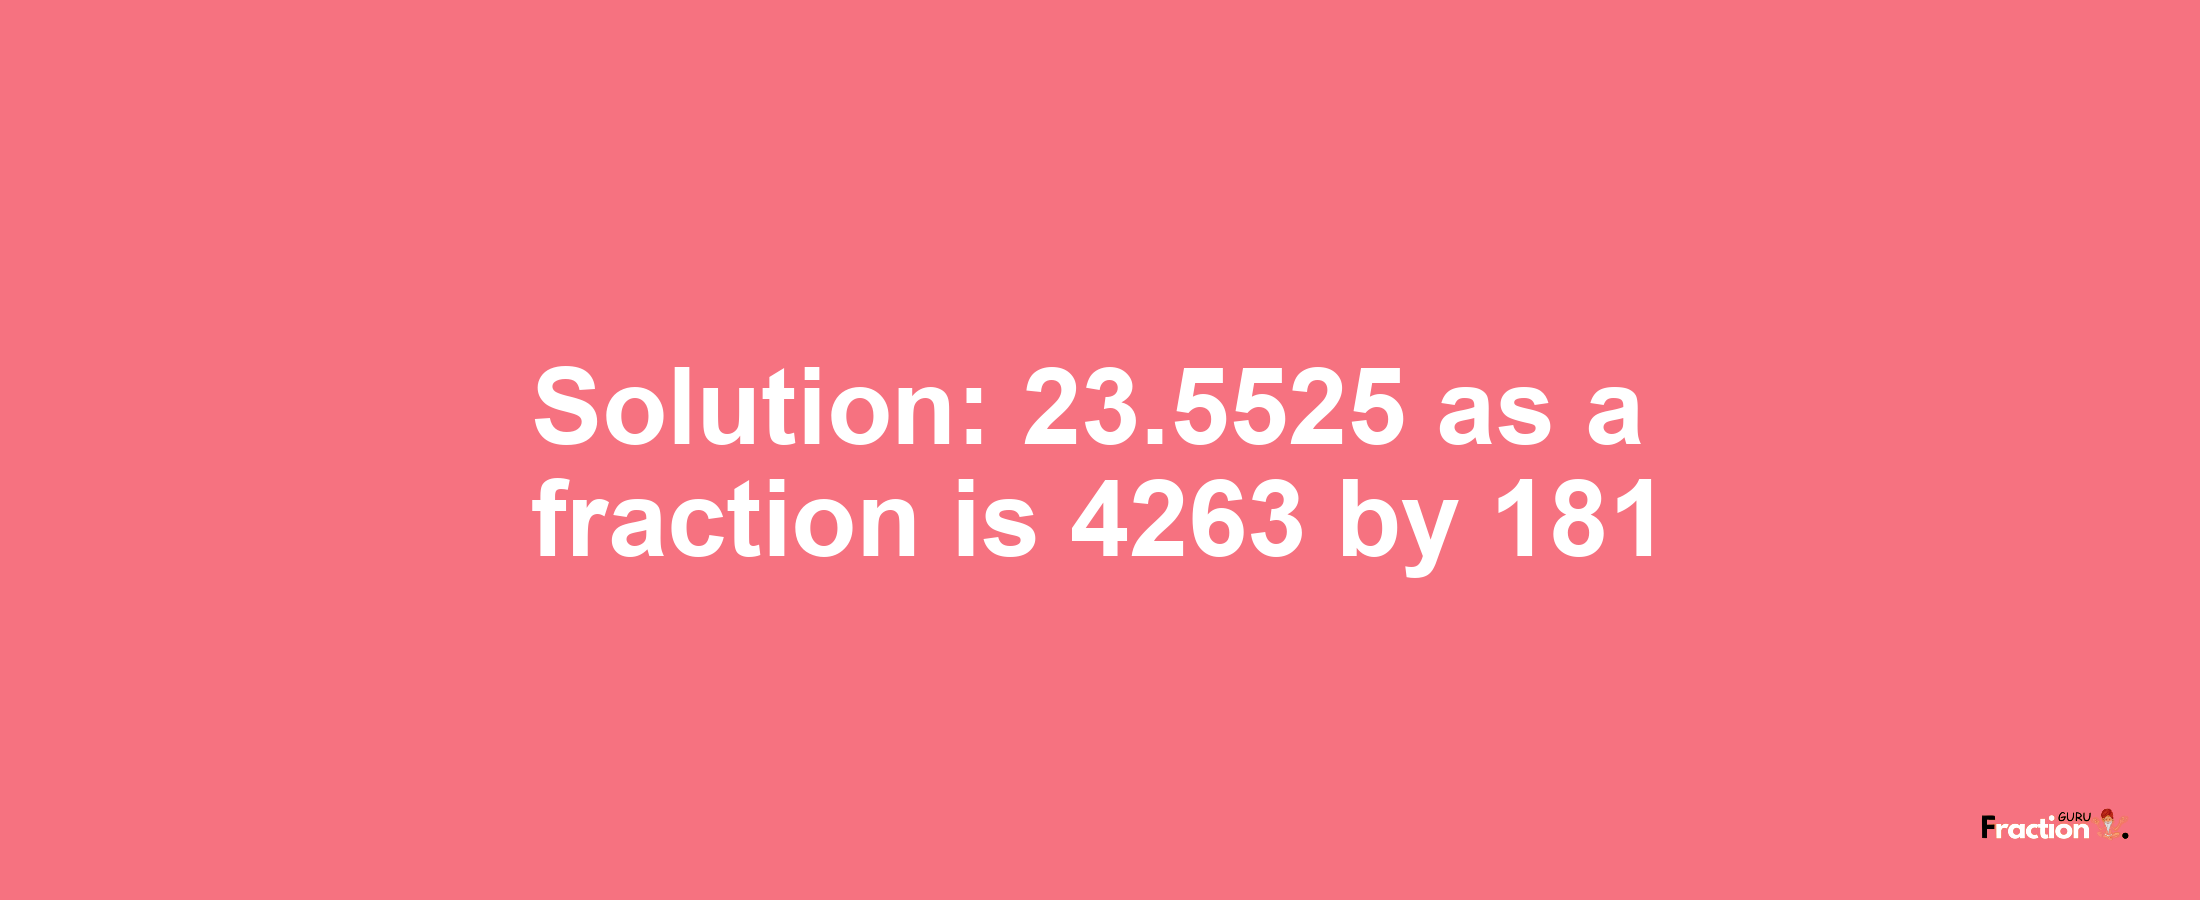 Solution:23.5525 as a fraction is 4263/181